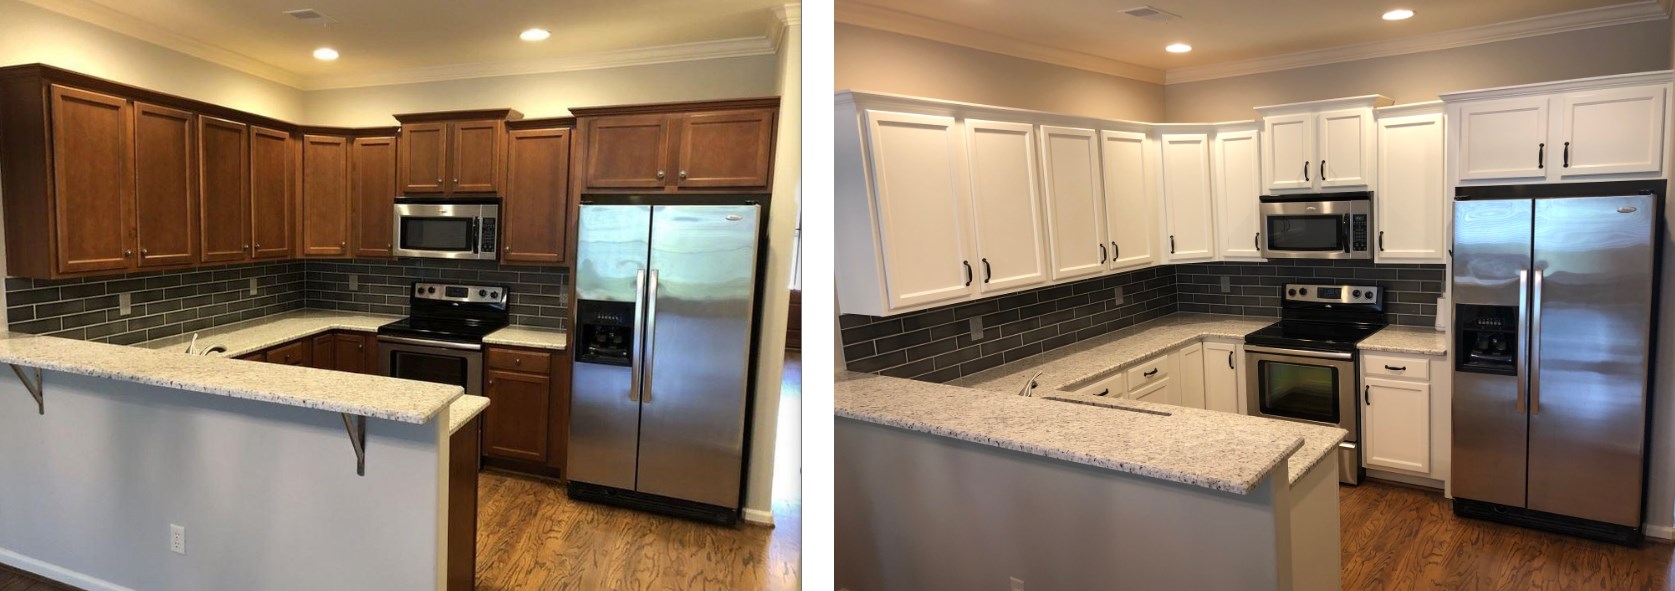 before and after remodel